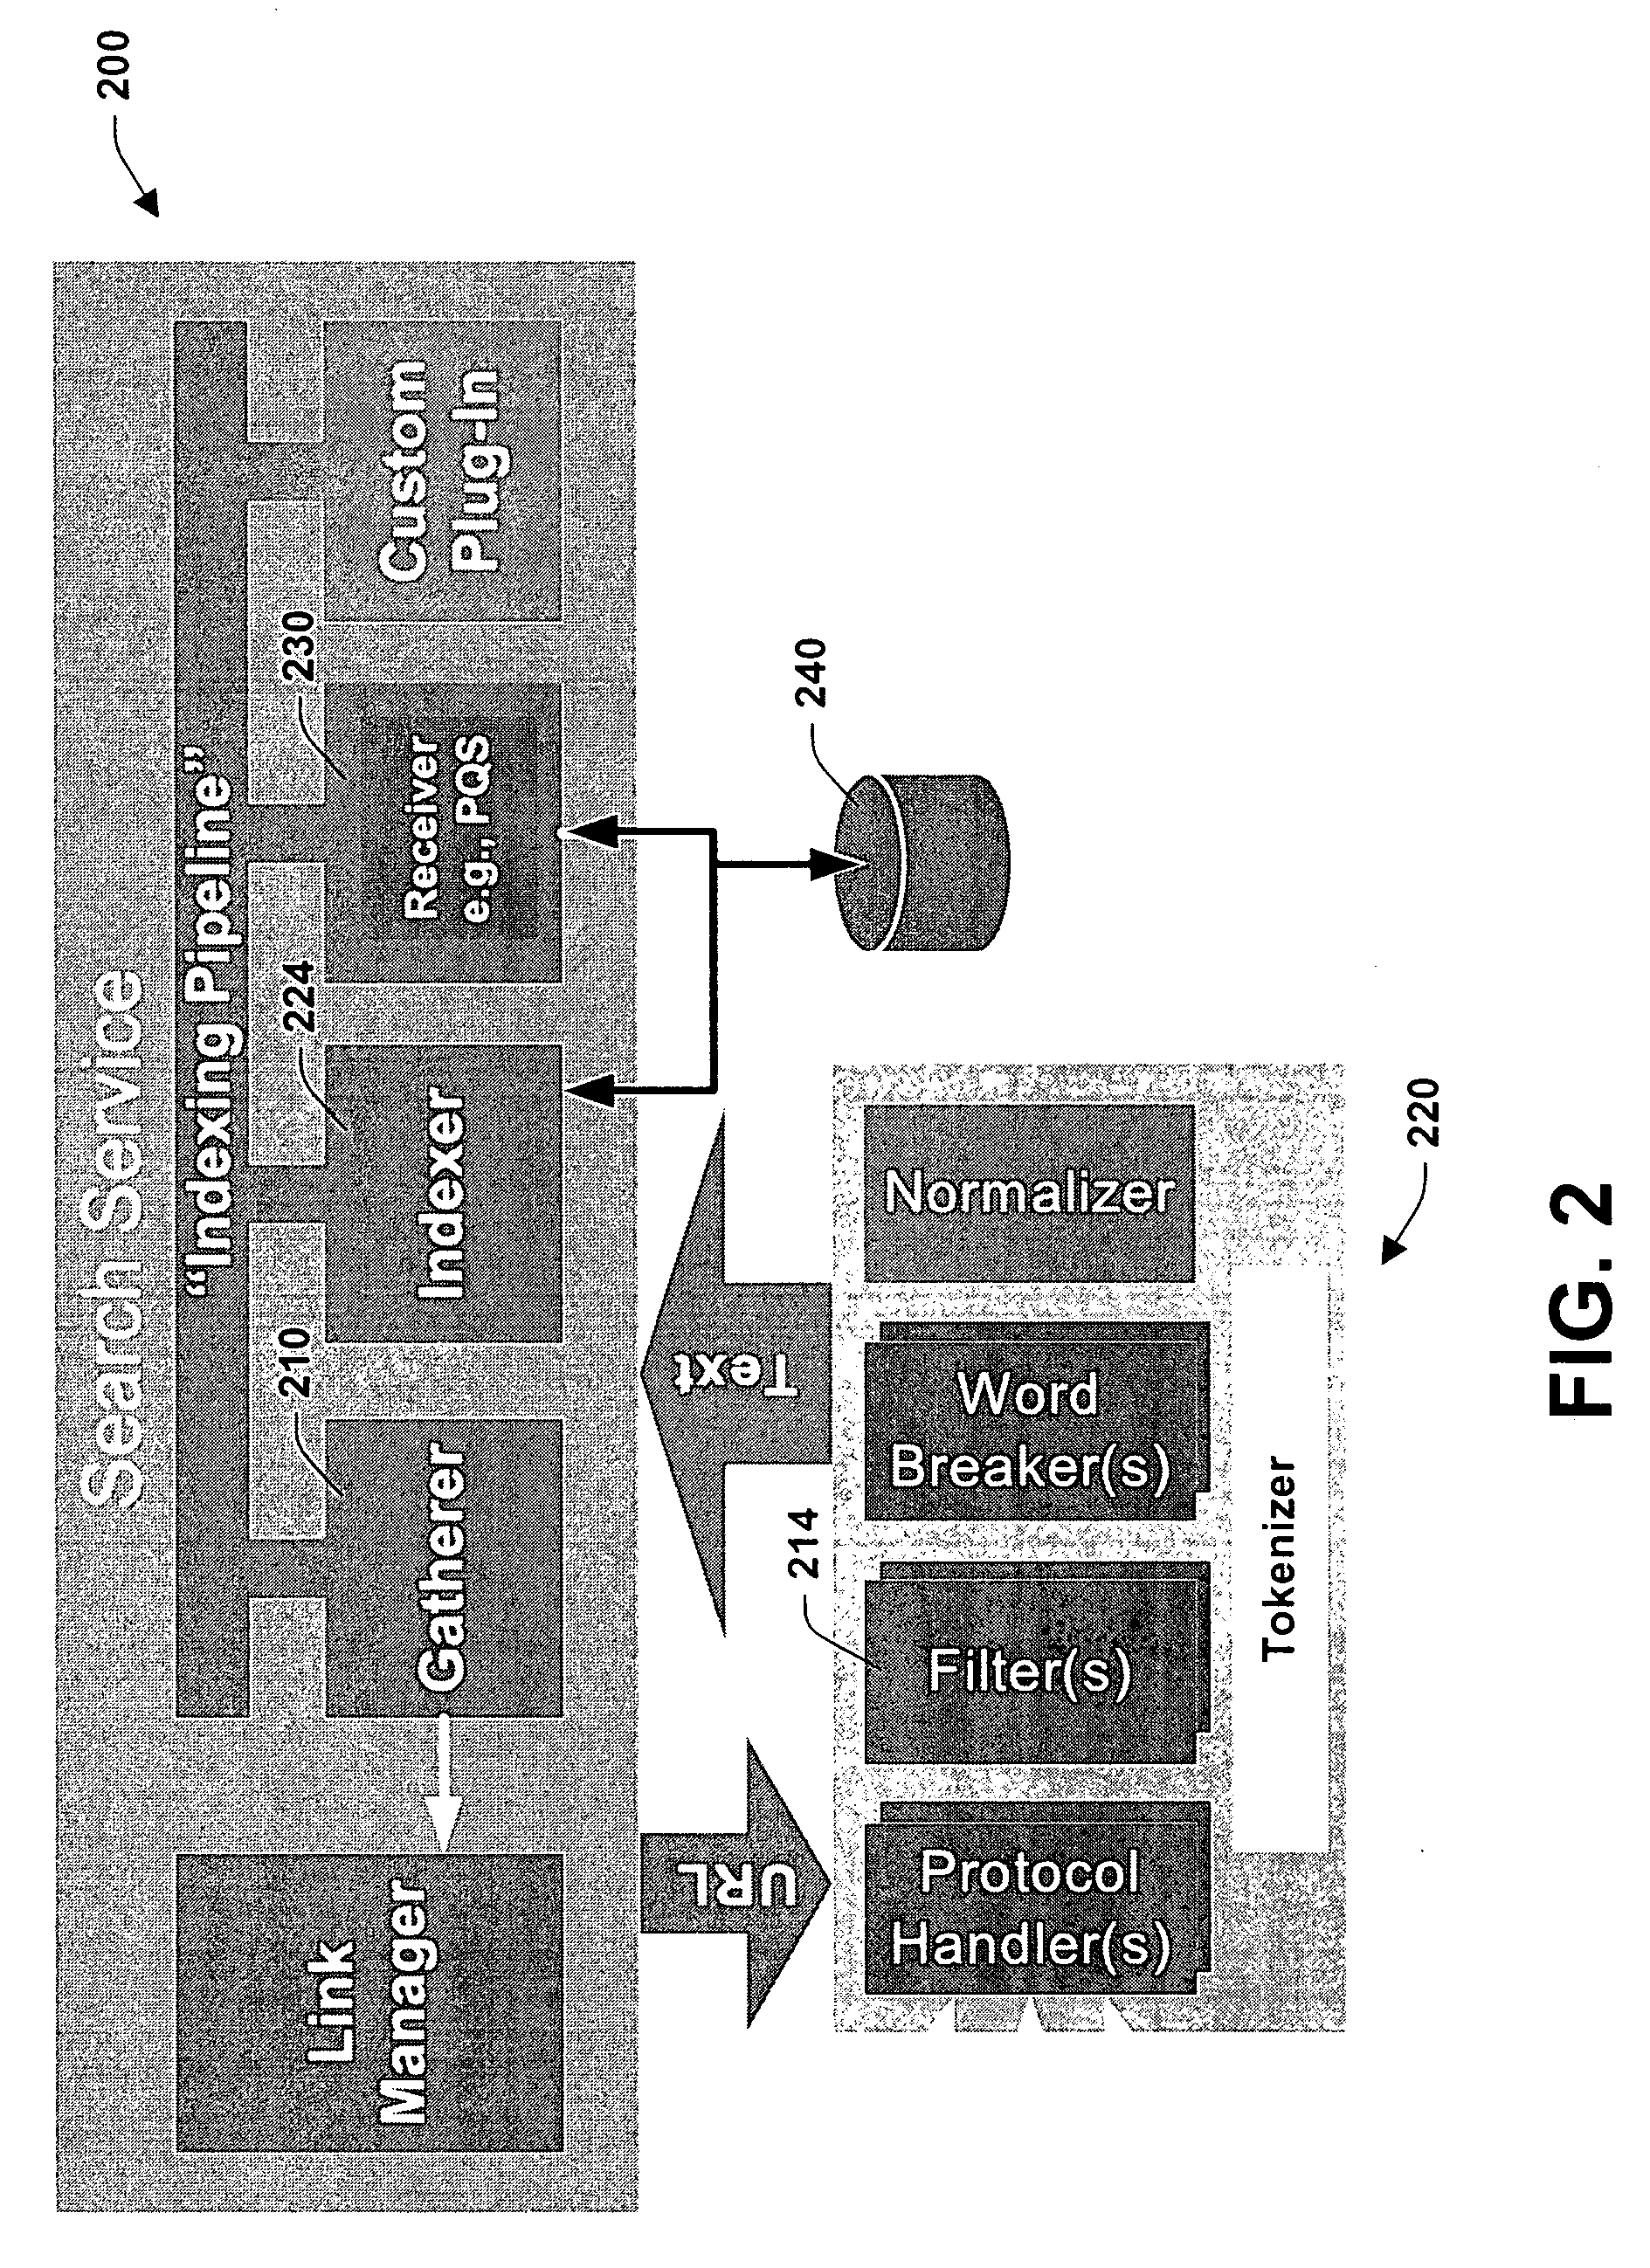 Method and system for usage analyzer that determines user accessed sources, indexes data subsets, and associated metadata, processing implicit queries based on potential interest to users